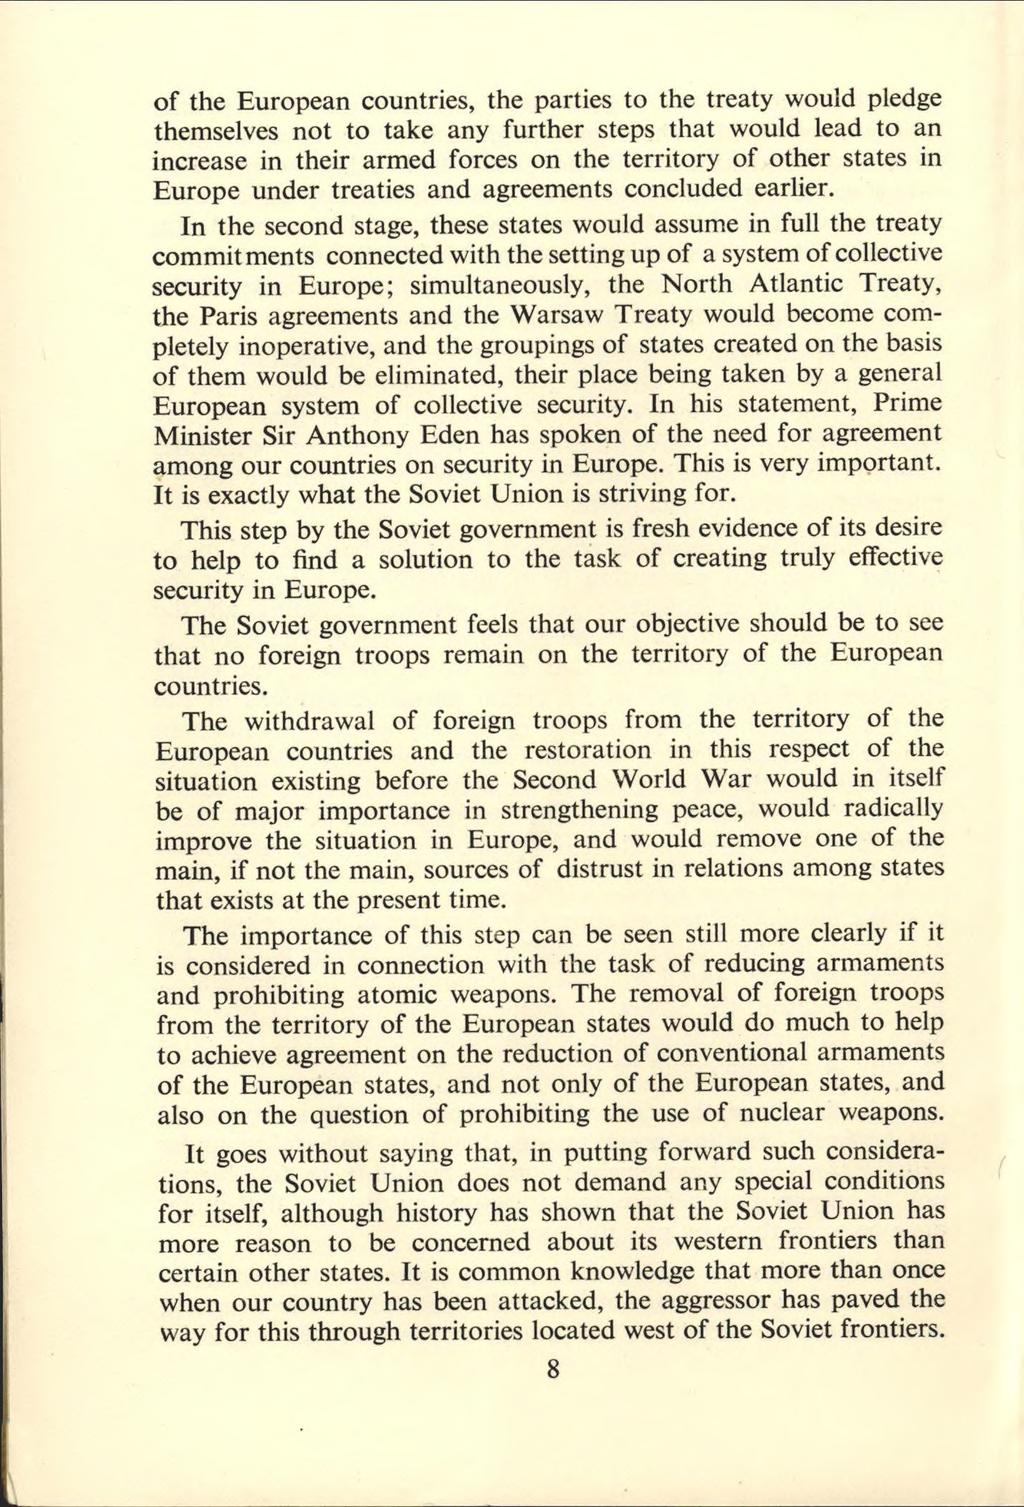 of the European countries, the parties to the treaty would pledge themselves not to take any further steps that would lead to an increase in their armed forces on the territory of other states in